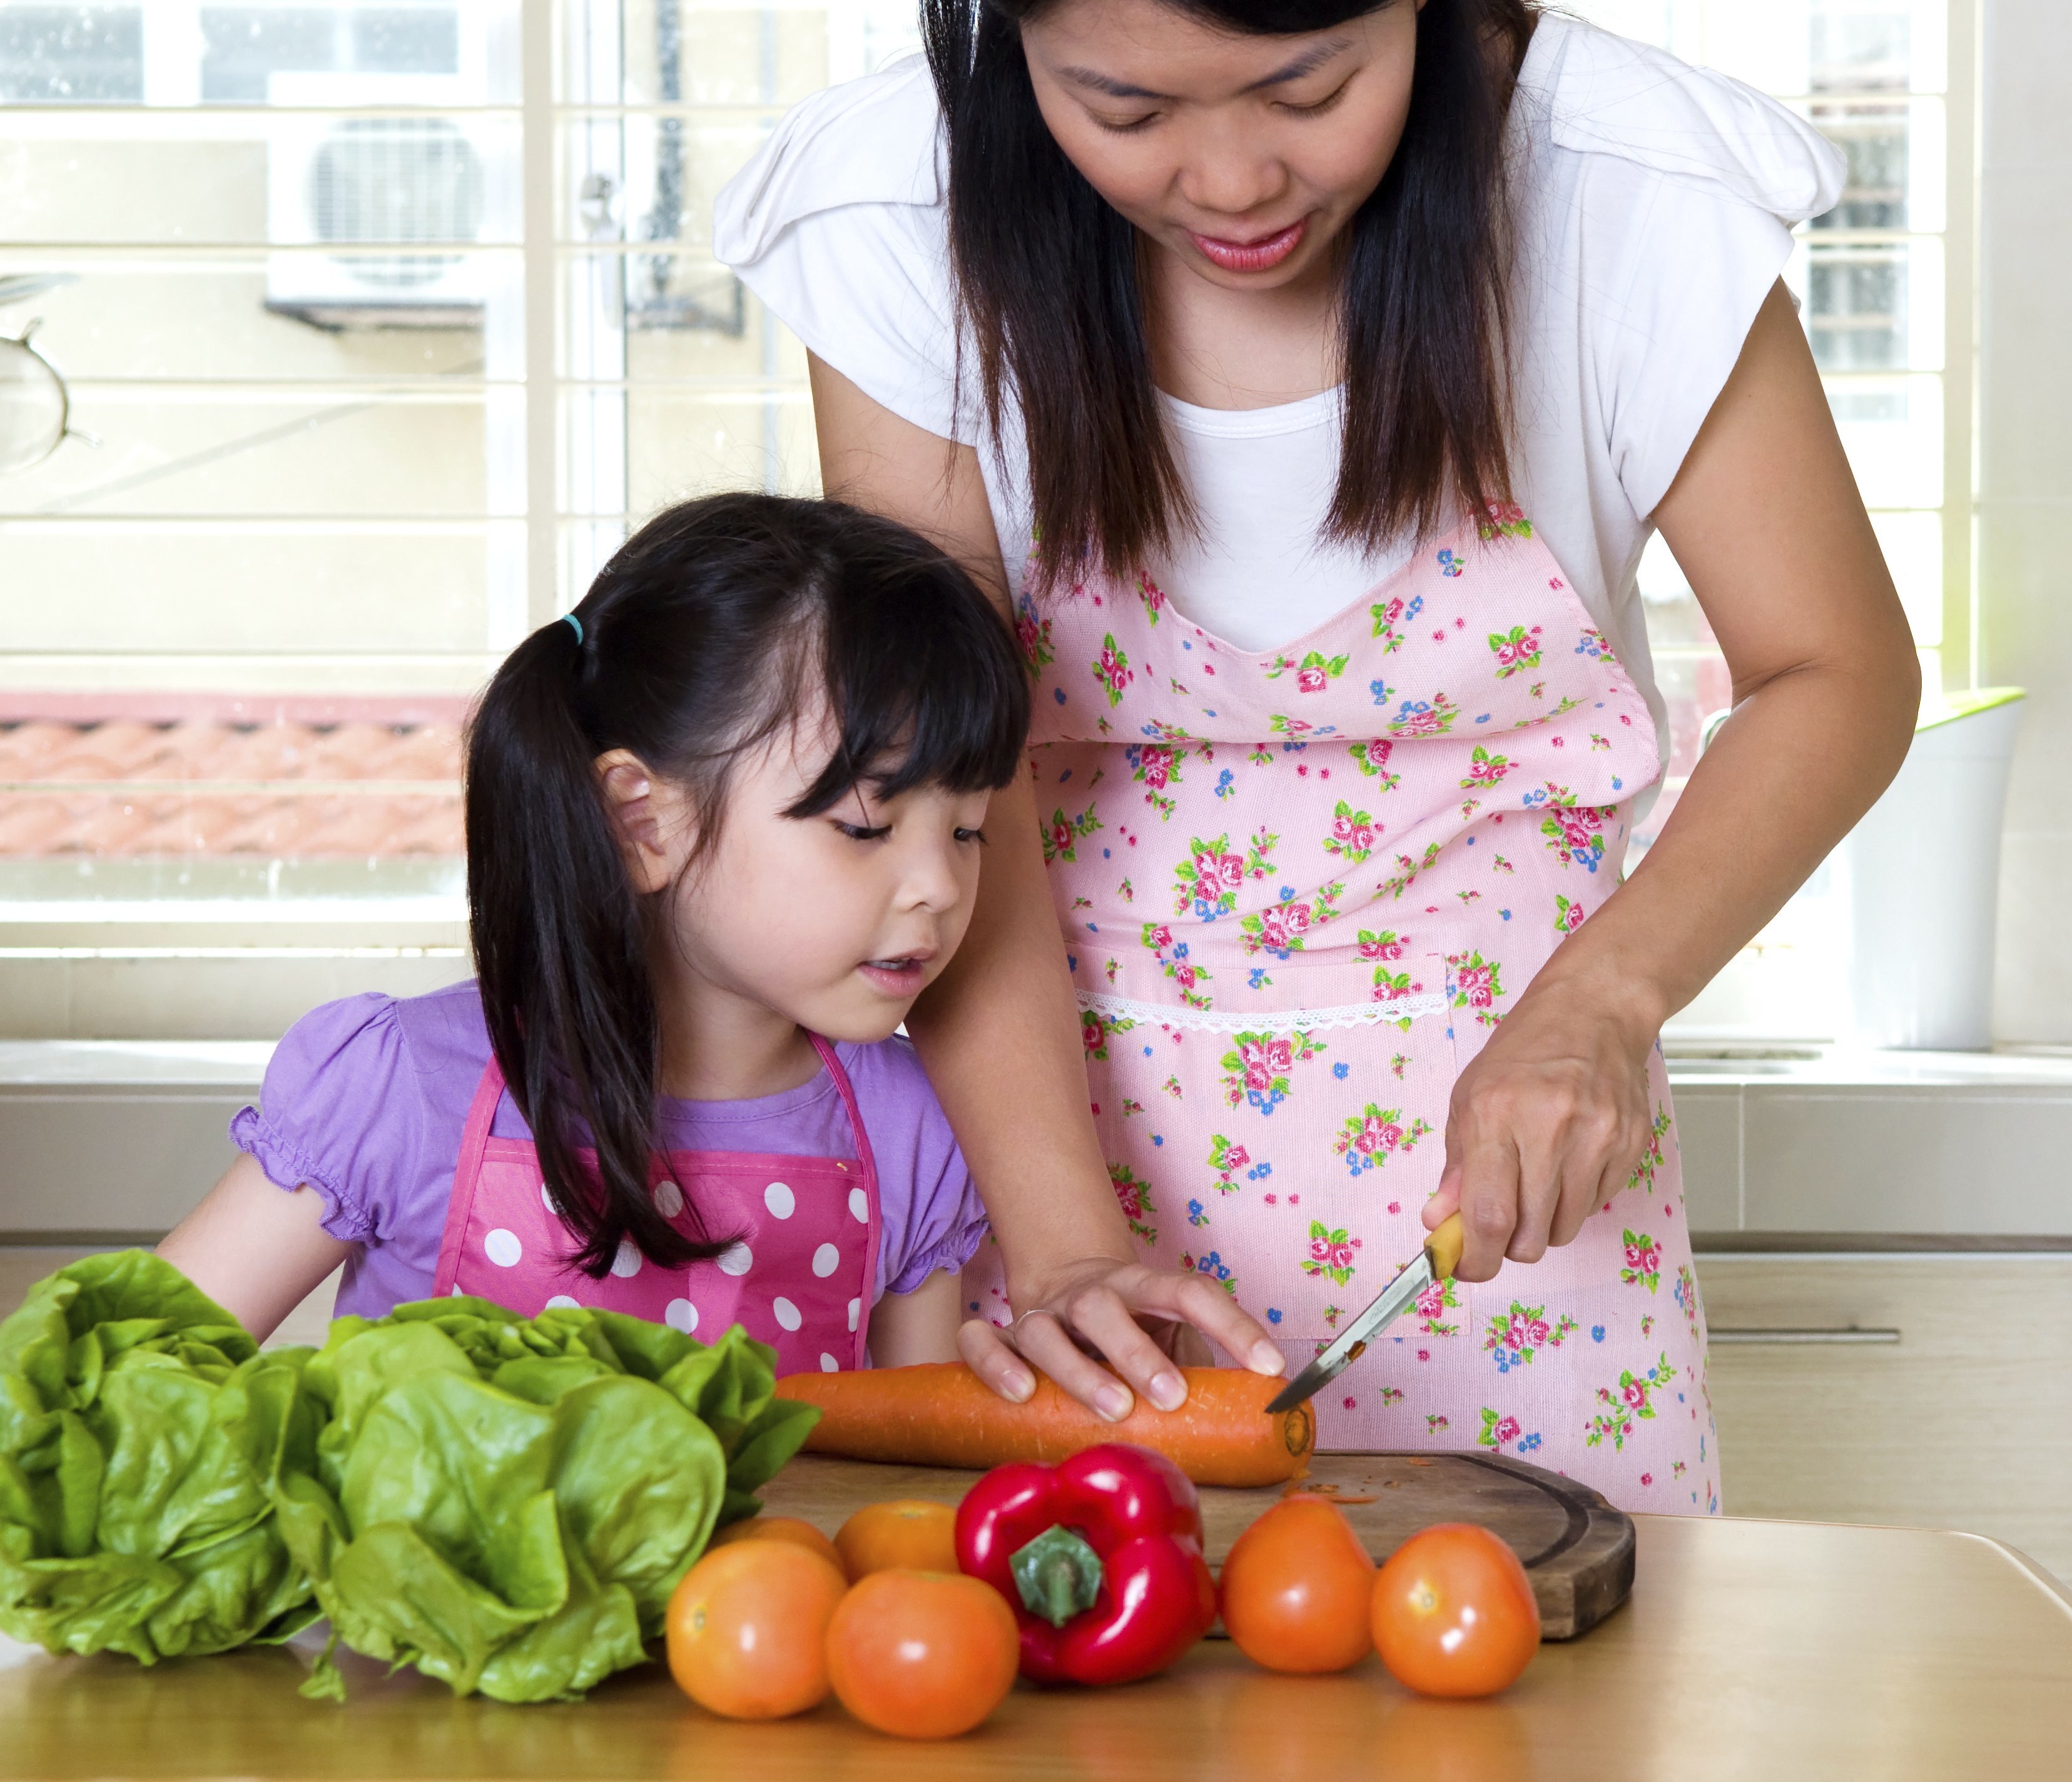 mom cutting up vegetables with child